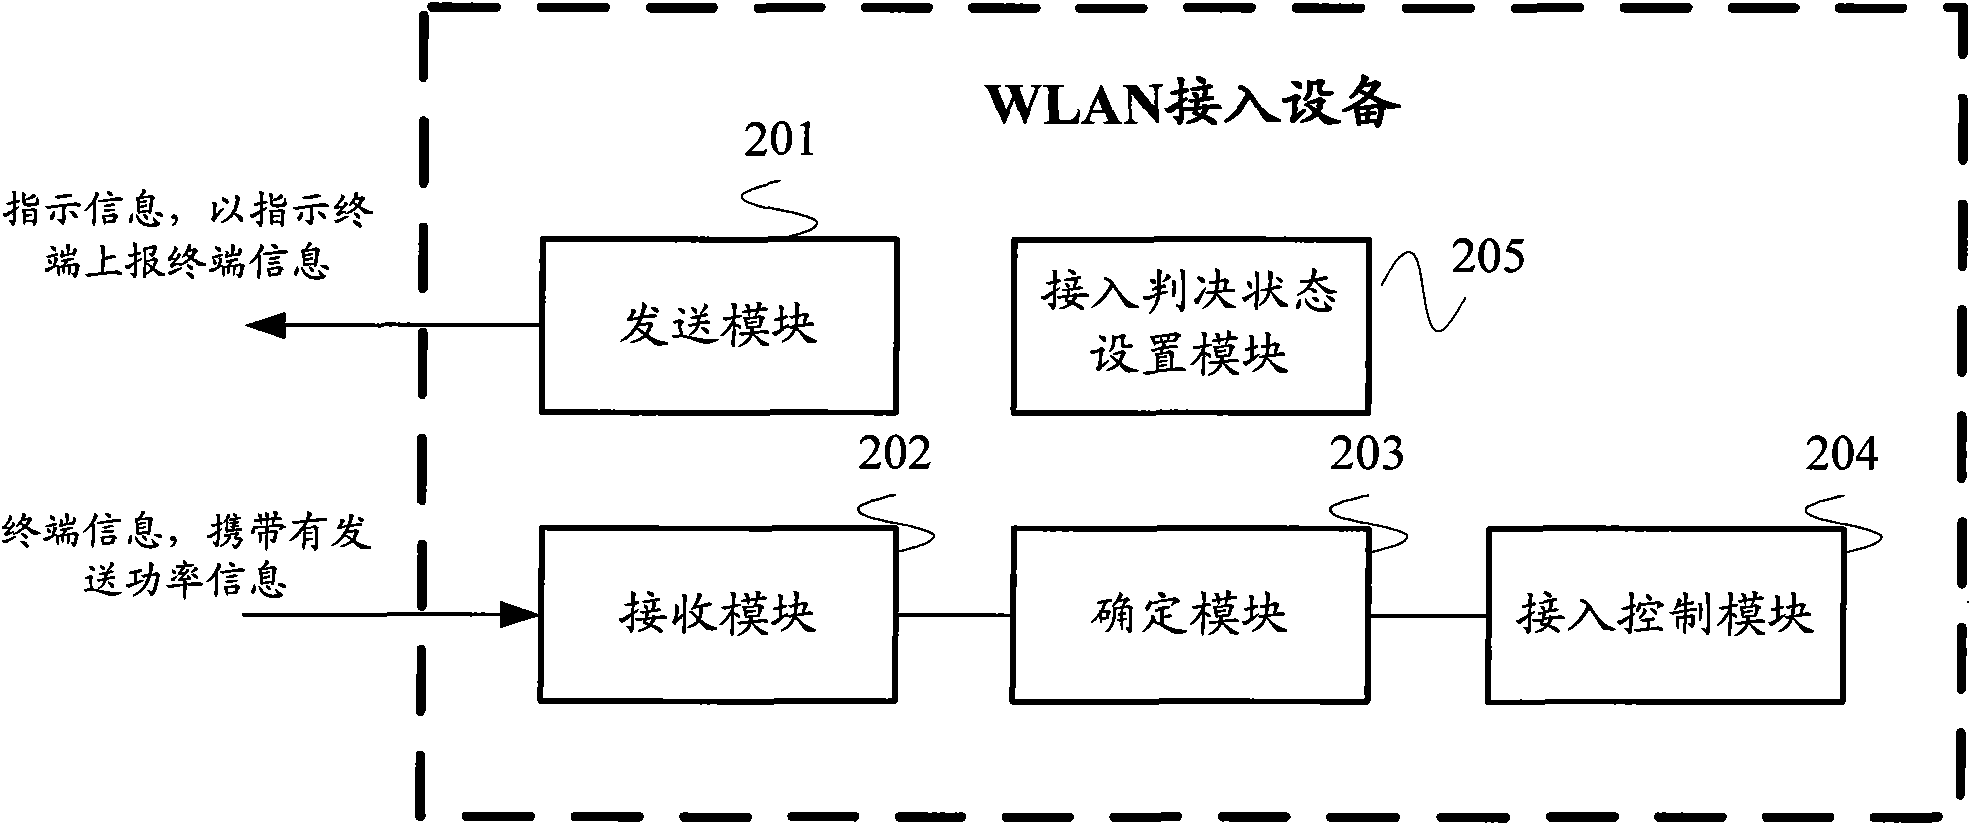 Wireless local area network (WLAN) access control method and device thereof